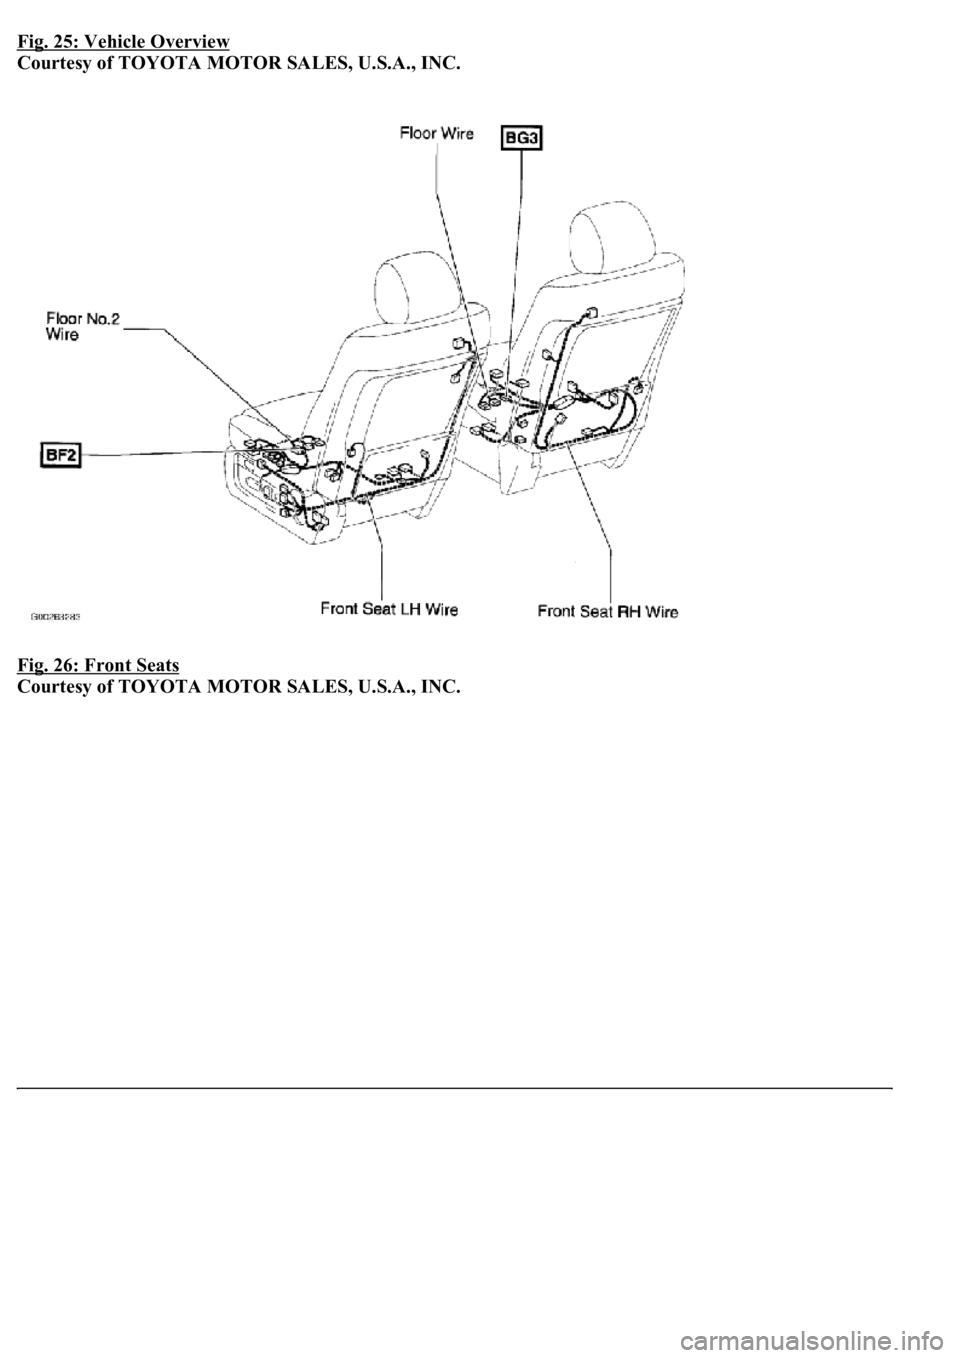 LEXUS LS430 2003  Factory Repair Manual Fig. 25: Vehicle Overview 
Courtesy of TOYOTA MOTOR SALES, U.S.A., INC. 
Fig. 26: Front Seats
 
Courtesy of TOYOTA MOTOR SALES, U.S.A., INC. 